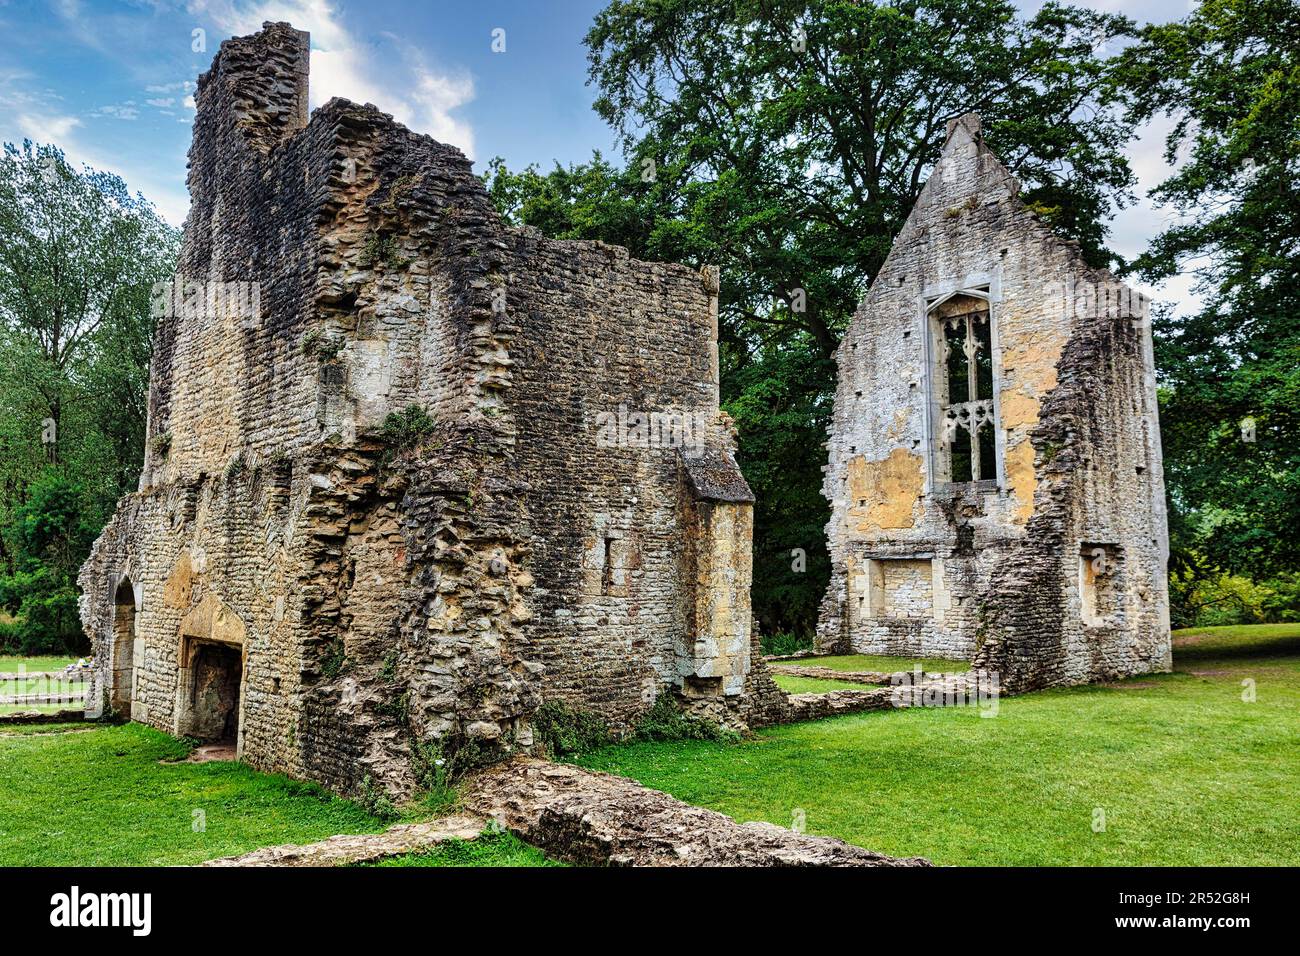 Ruin of Minster Lovell, Oxfordshire, Cotswolds, Angleterre, Royaume-Uni Banque D'Images